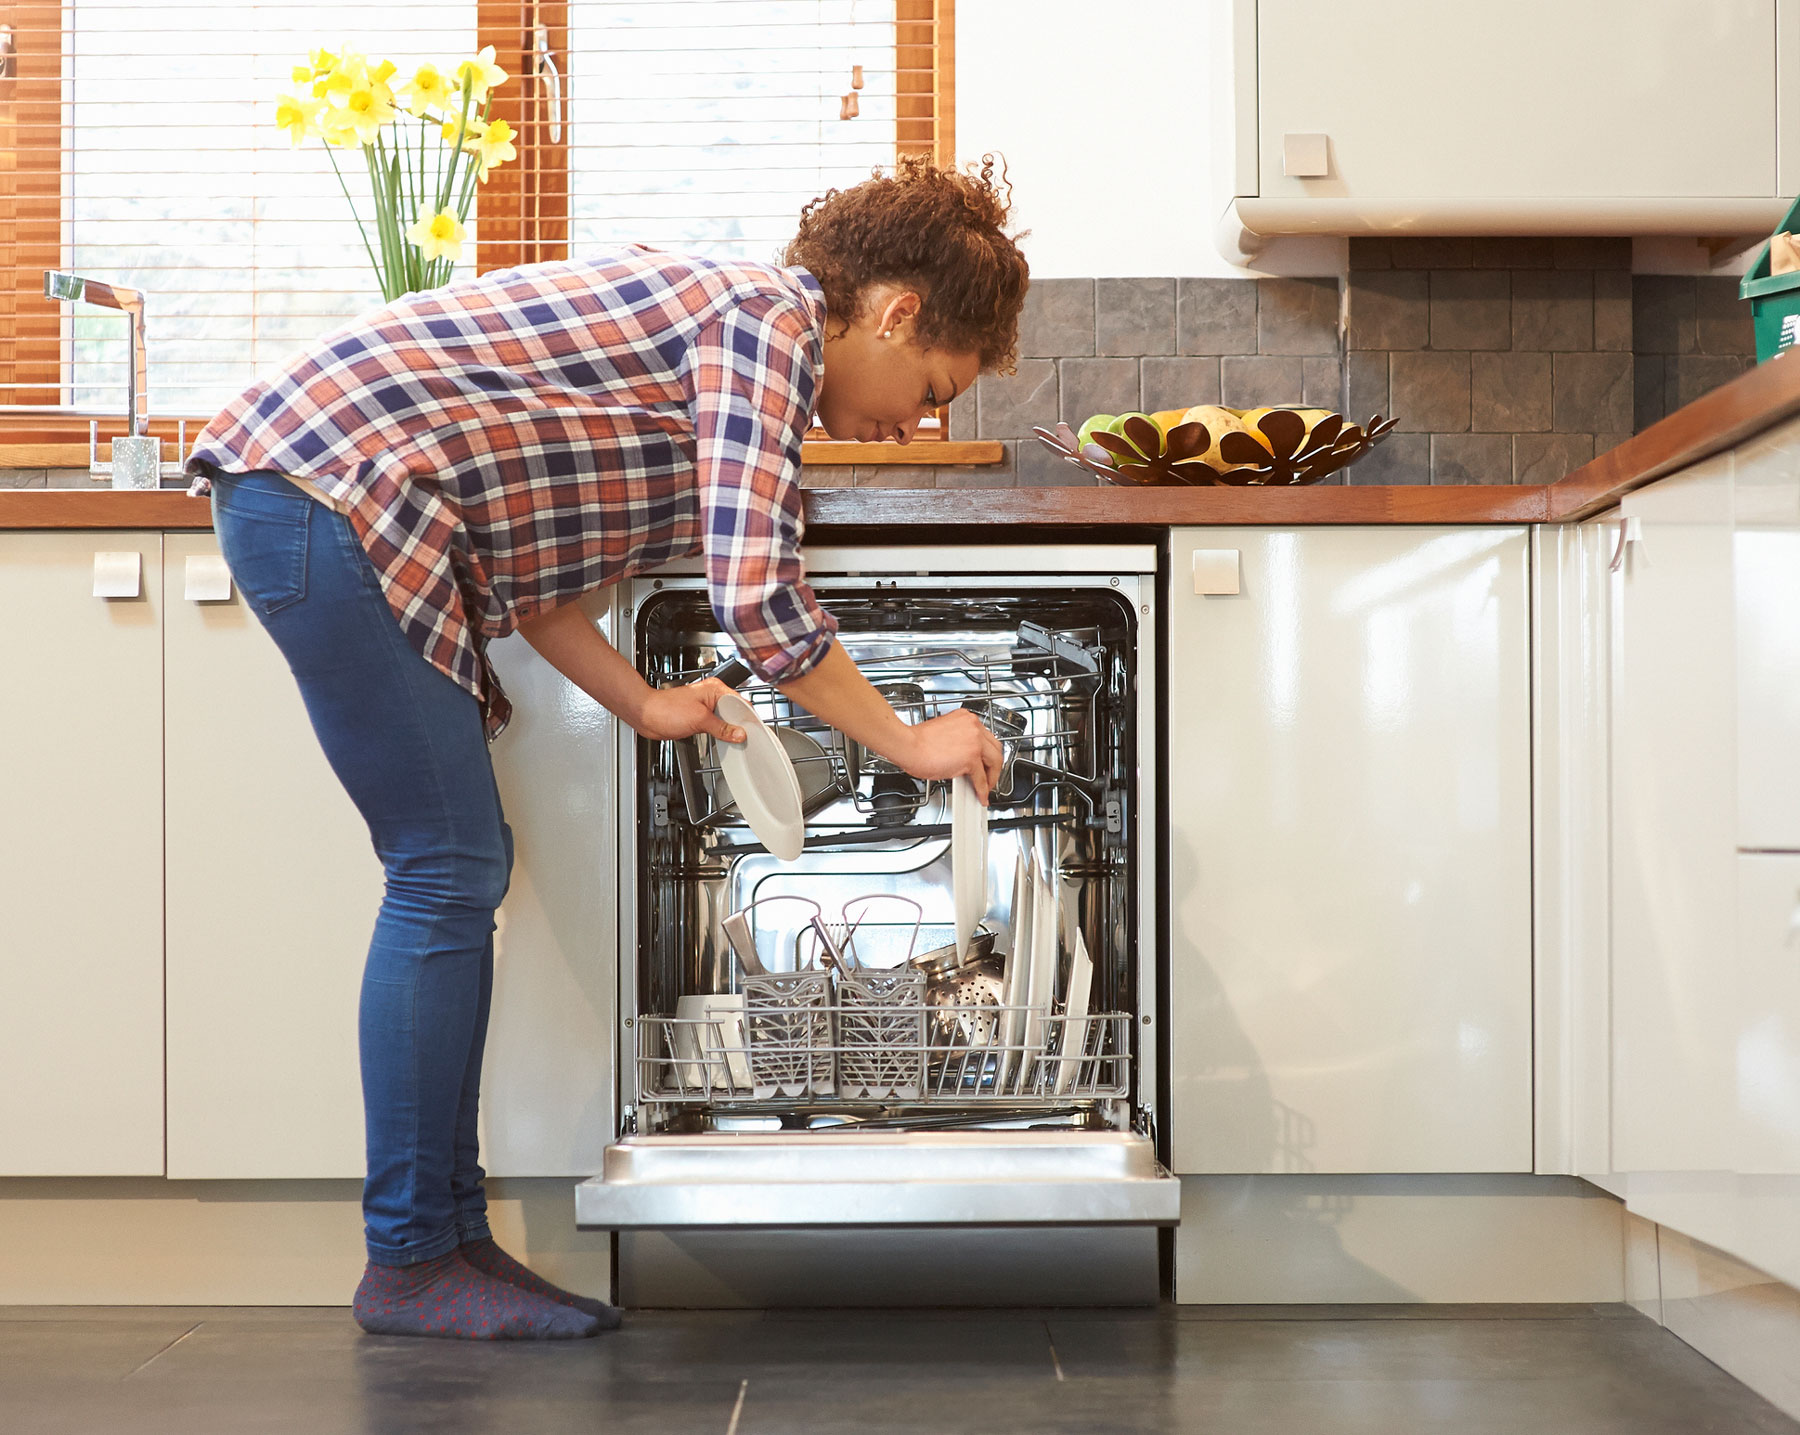 How To Deal With Dishwasher That Fails To Drain Properly